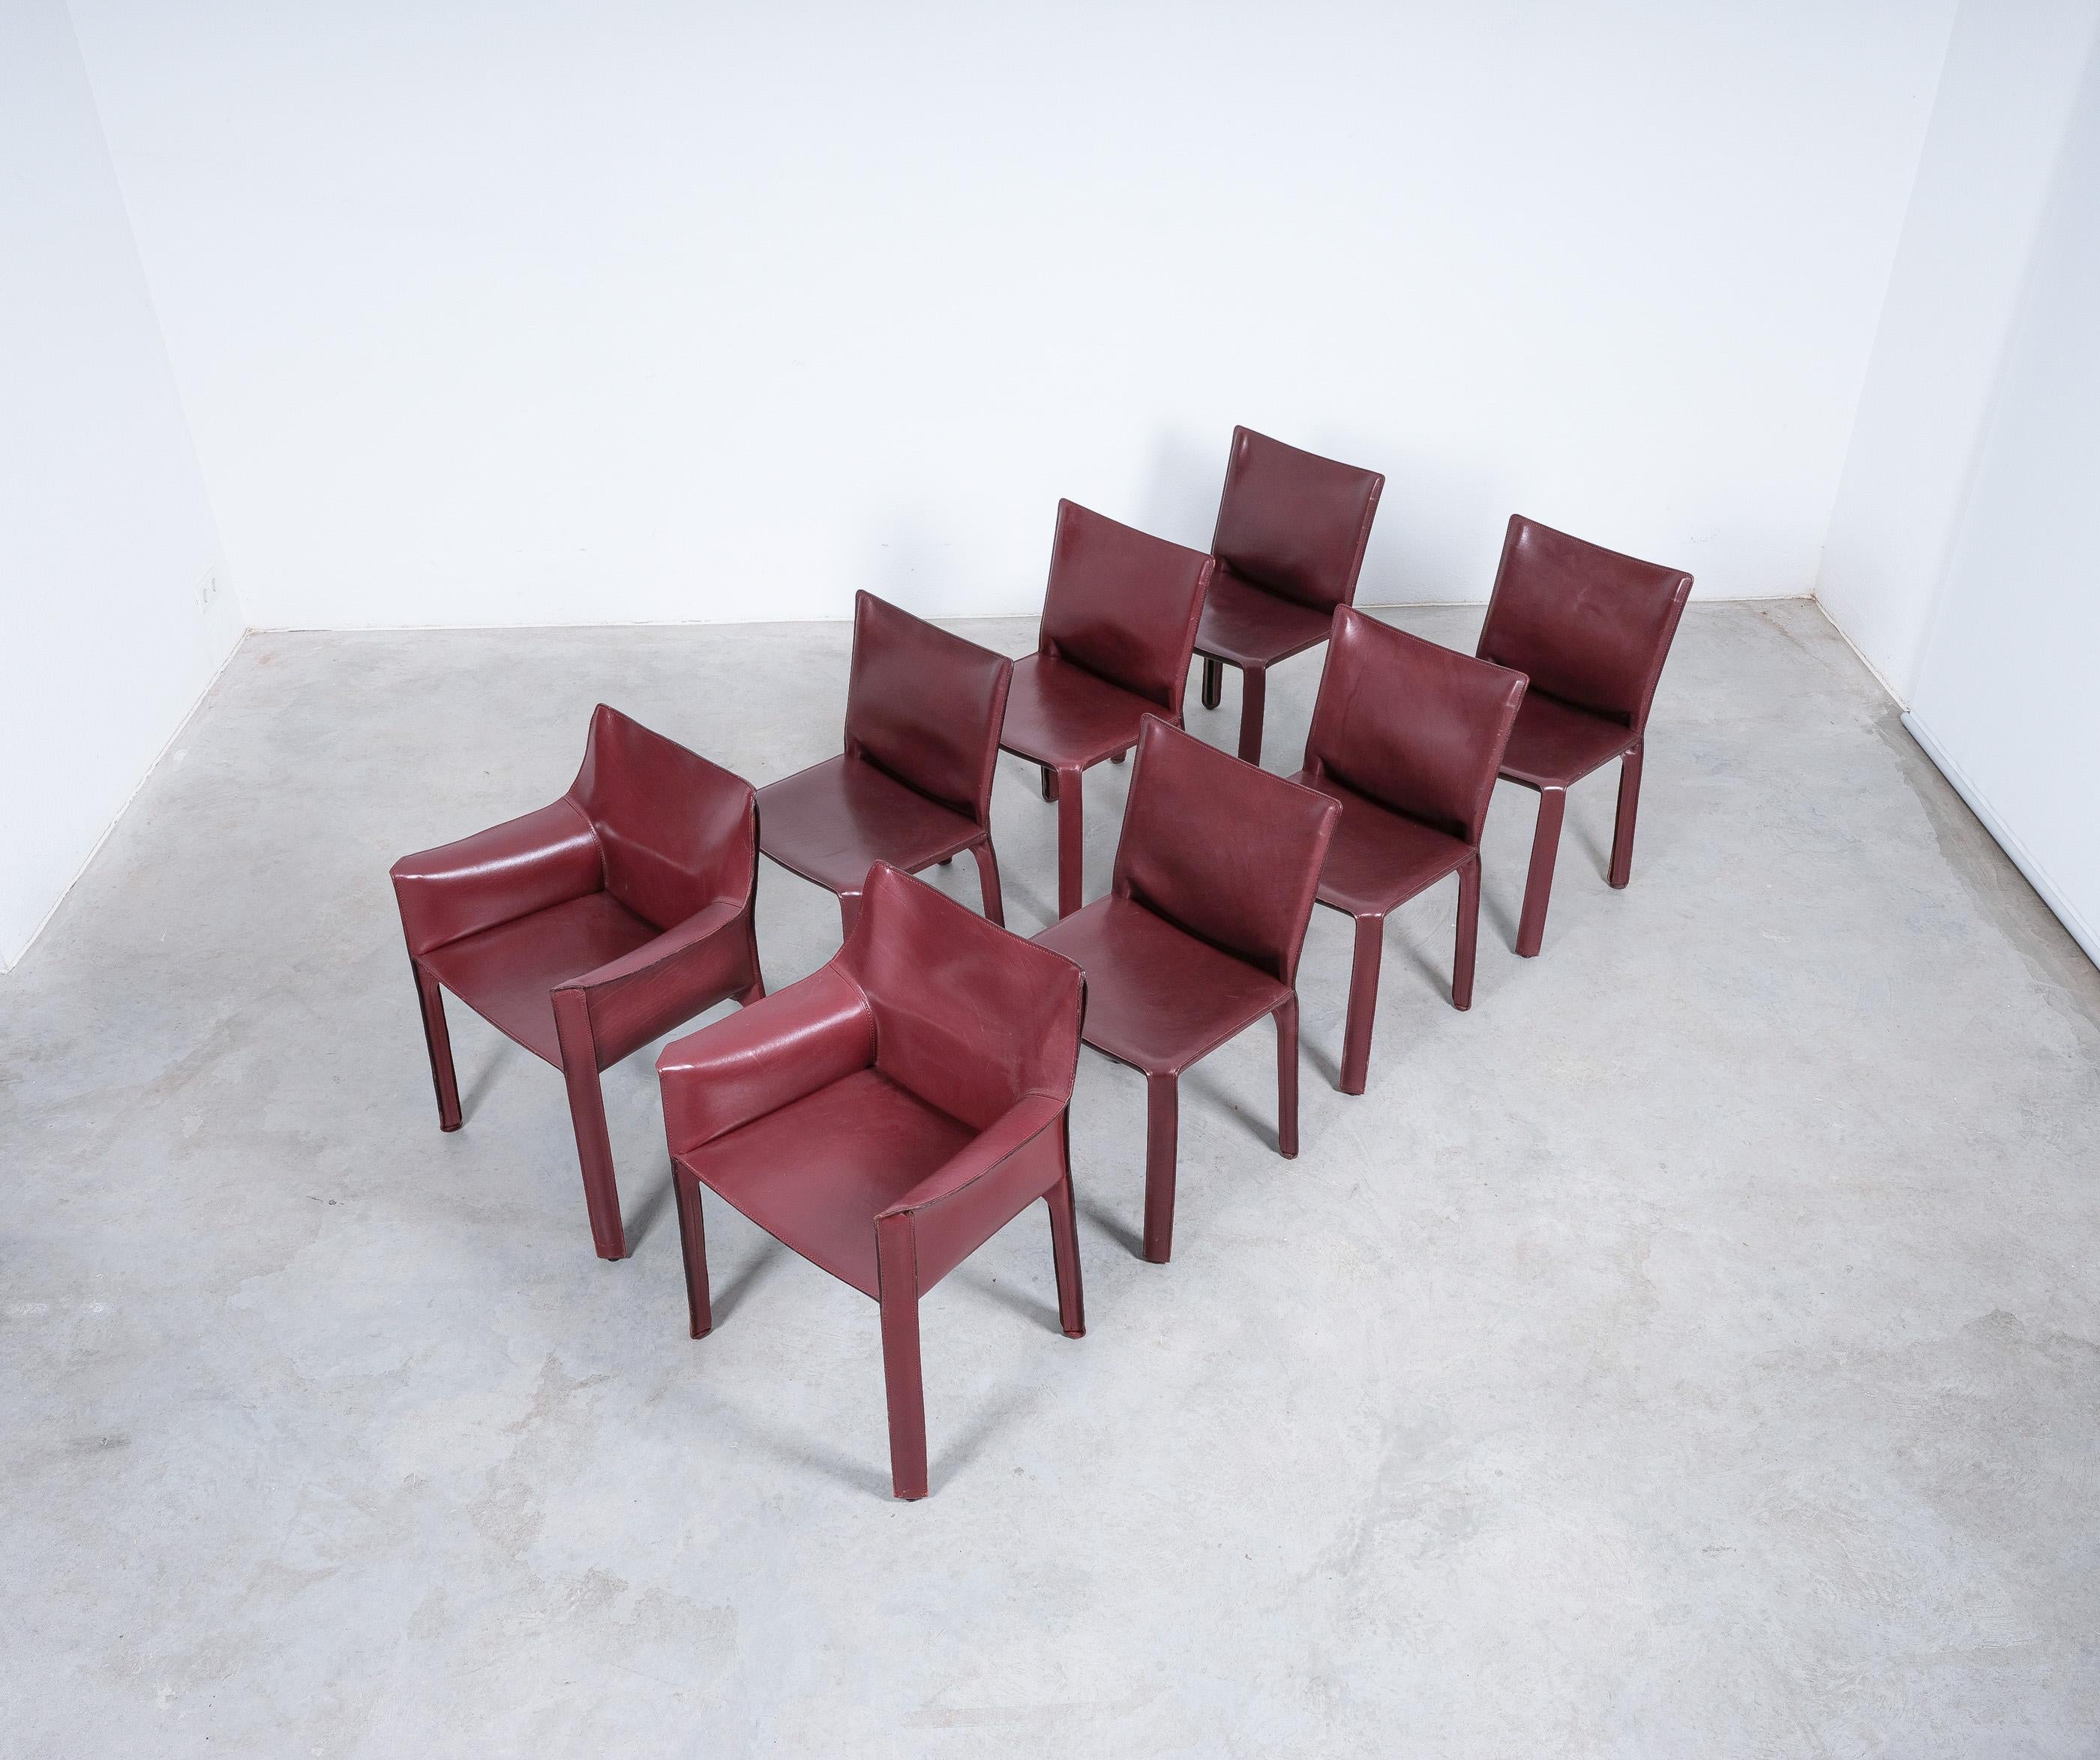 Steel Mario Bellini Cassina Cab 412, 413 Set of Ten 9 Red Leather Dining Chairs